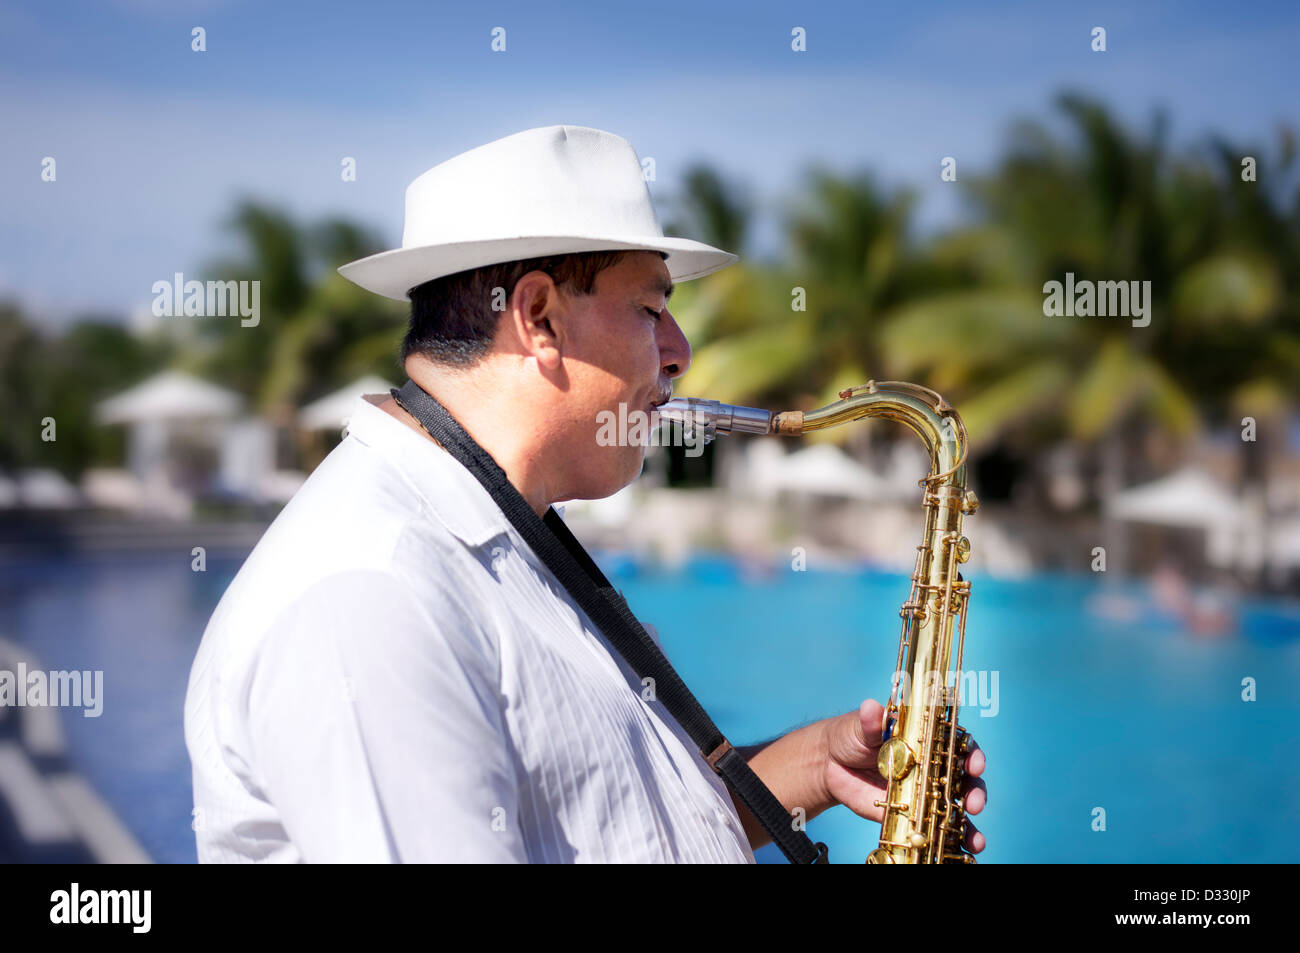 Portrait of man playing Saxophone at beach Stock Photo